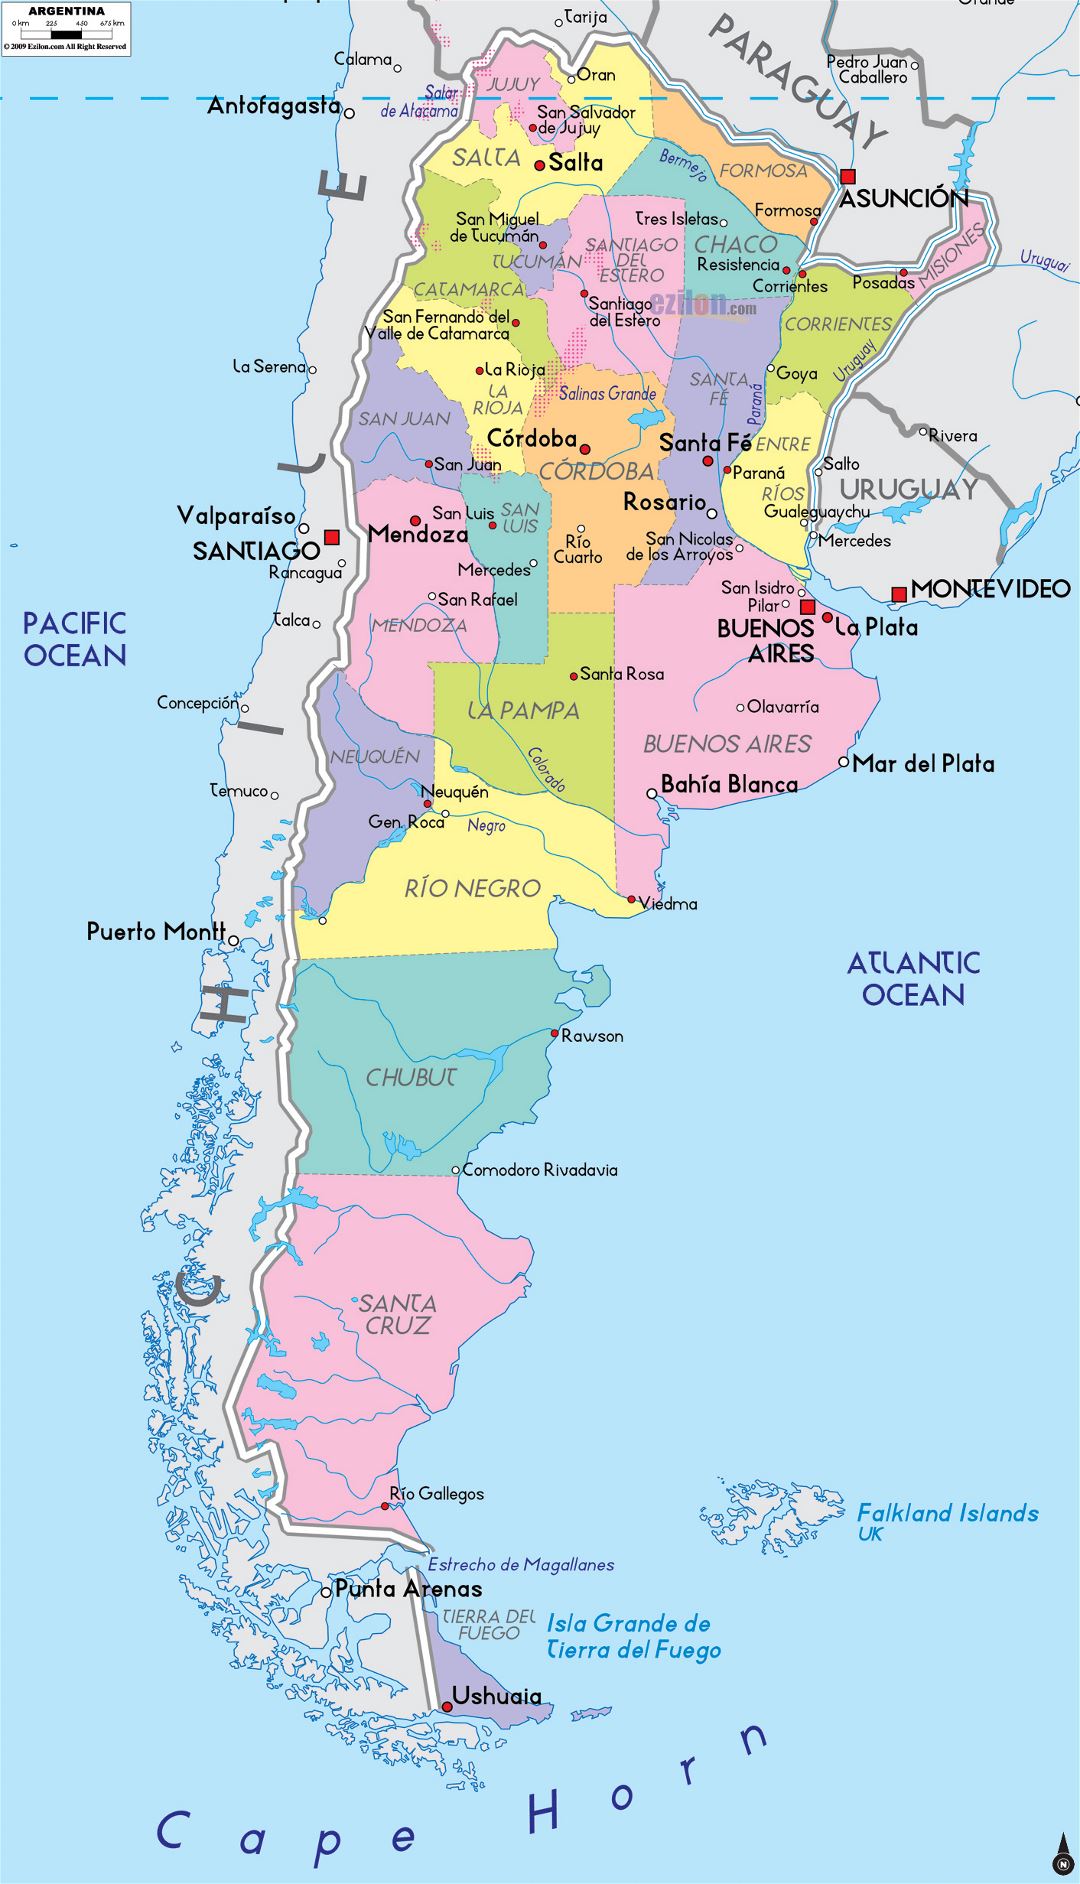 Large political and administrative map of Argentina with major cities